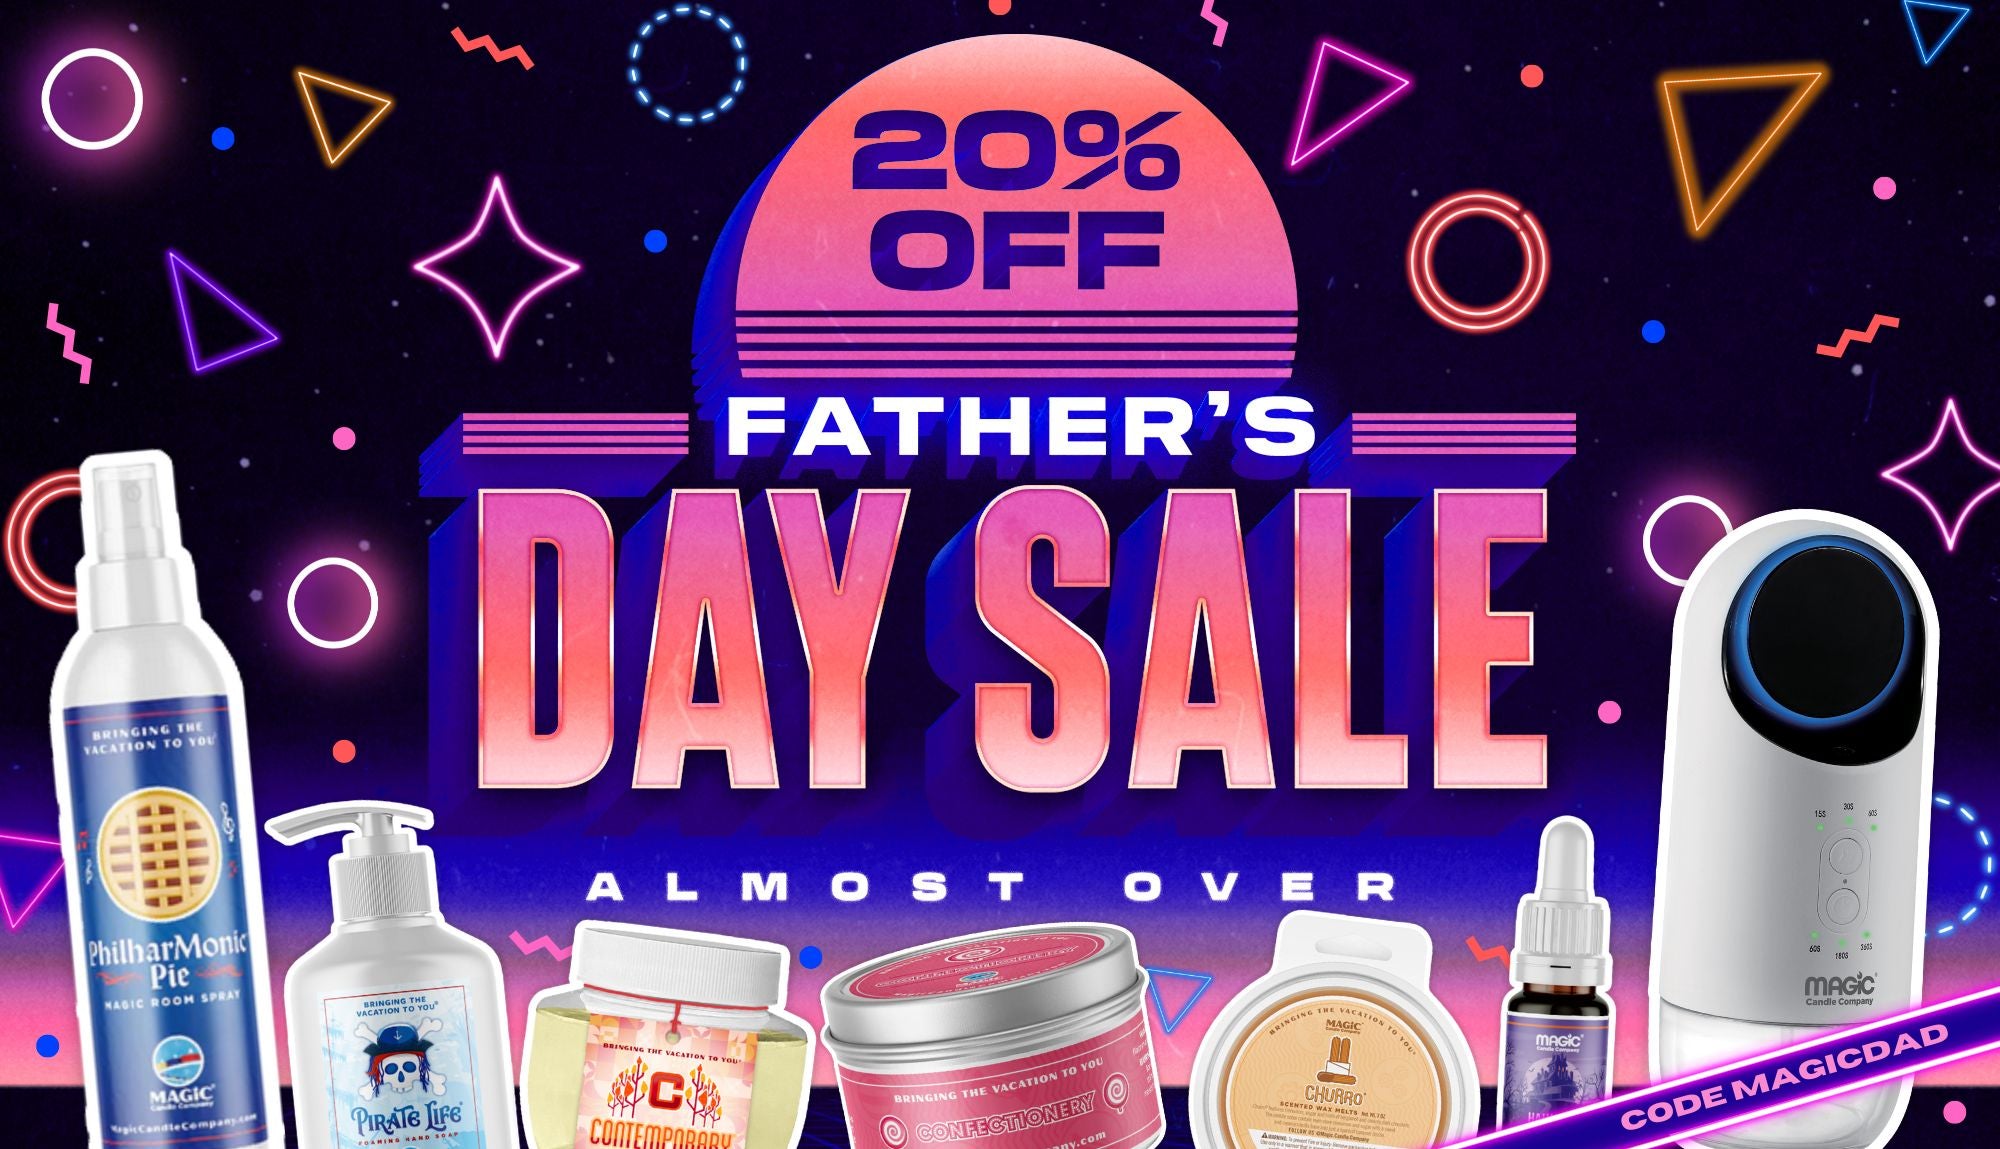 Father's Day Sale 20% OFF